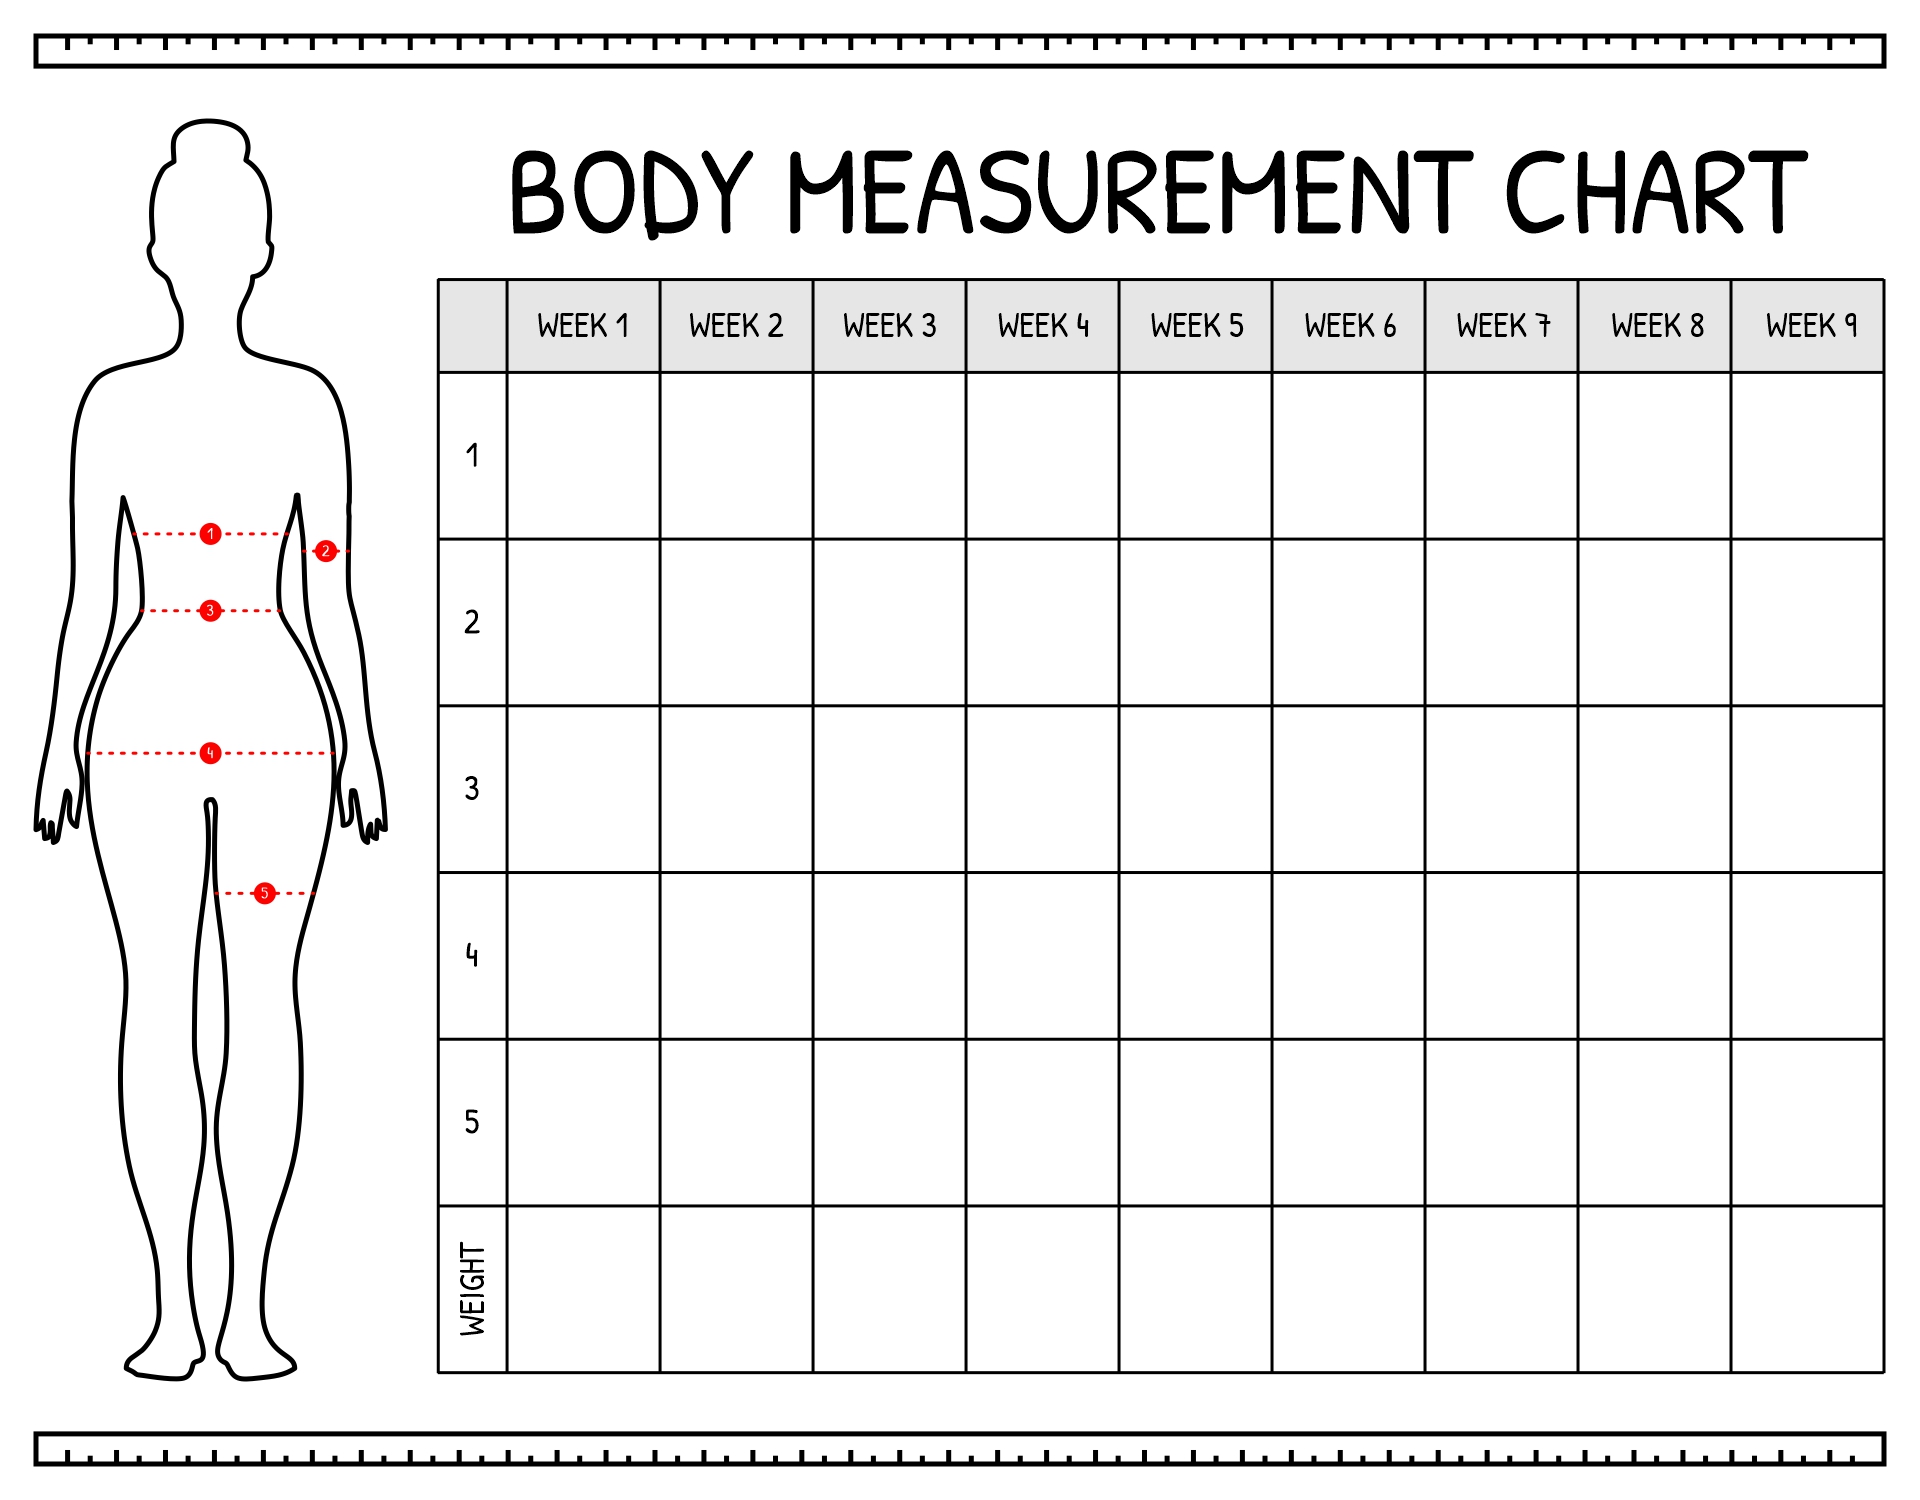 7-best-images-of-printable-weight-loss-measurement-chart-printable-body-measurement-chart